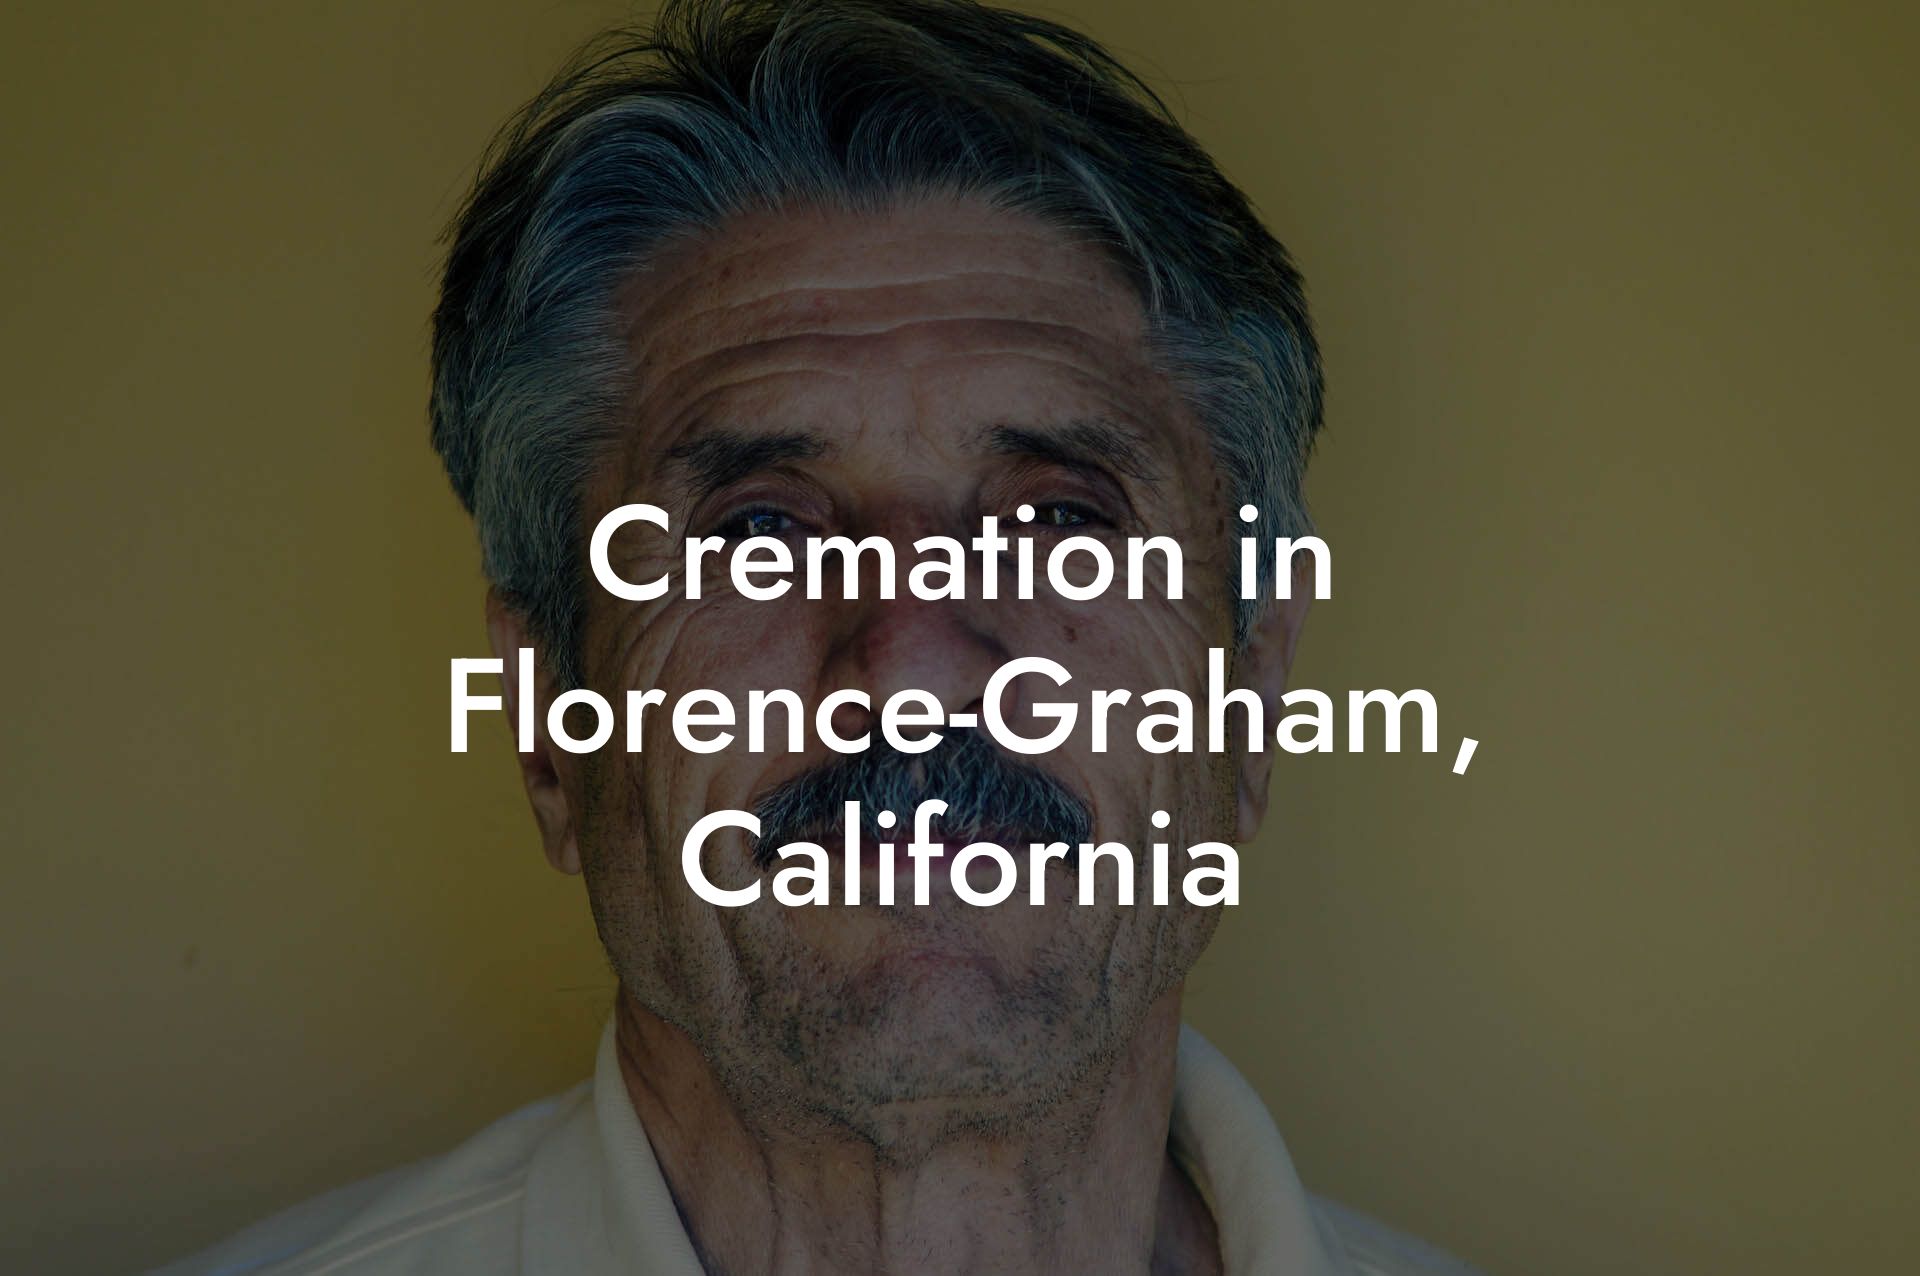 Cremation in Florence-Graham, California